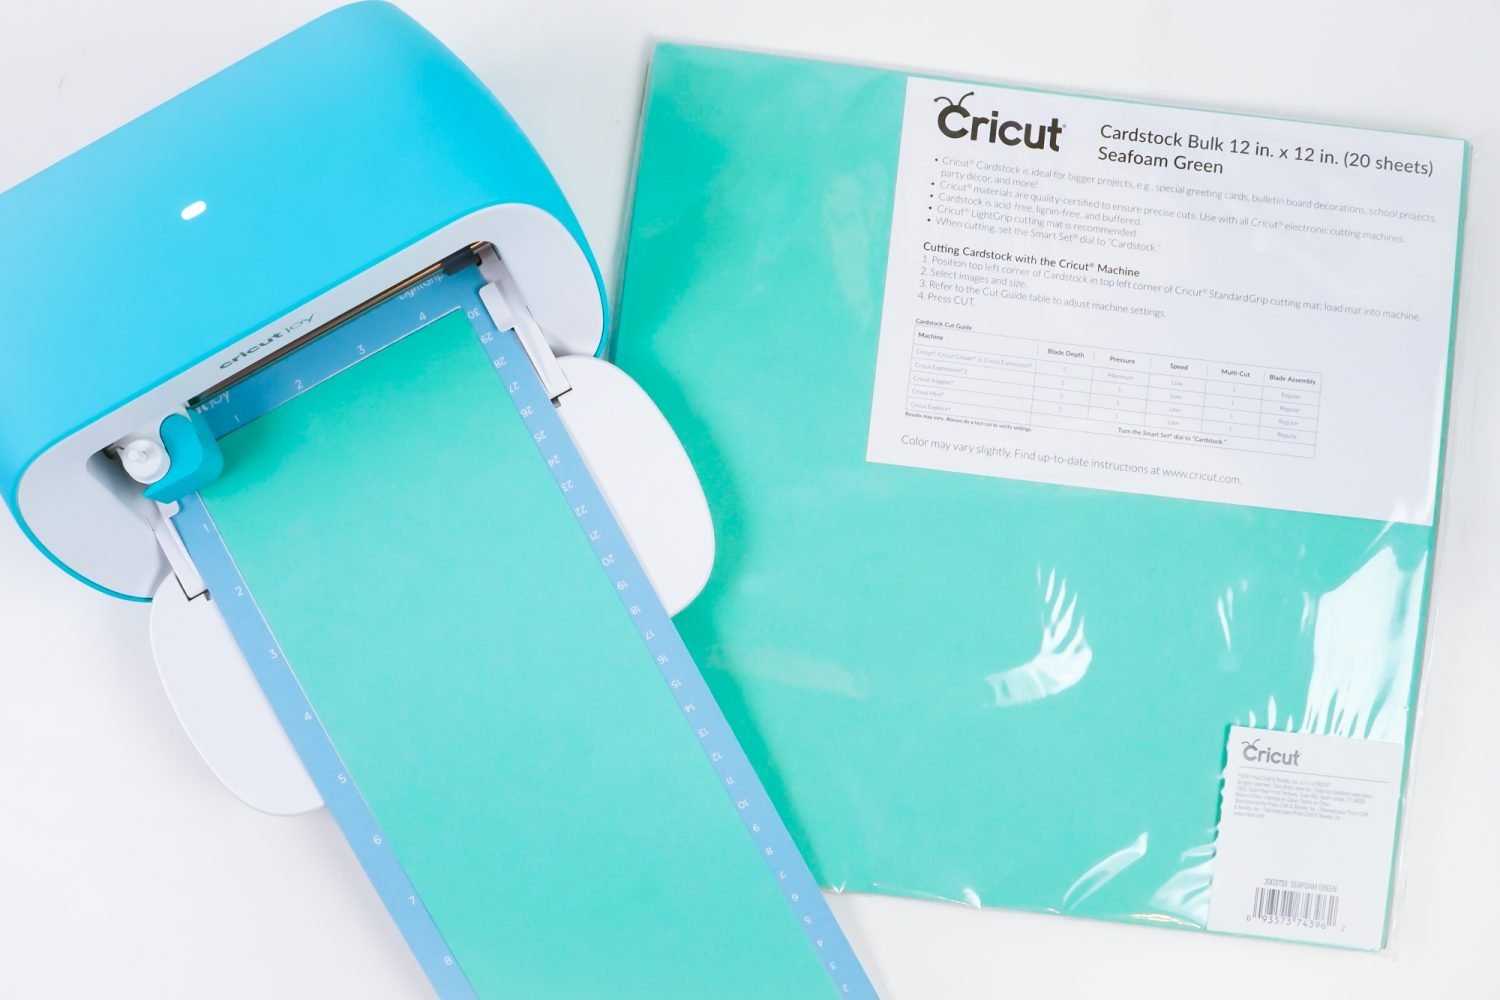 Cricut Joy Materials: A Guide for Successful Cutting - Hey, Let's Make Stuff